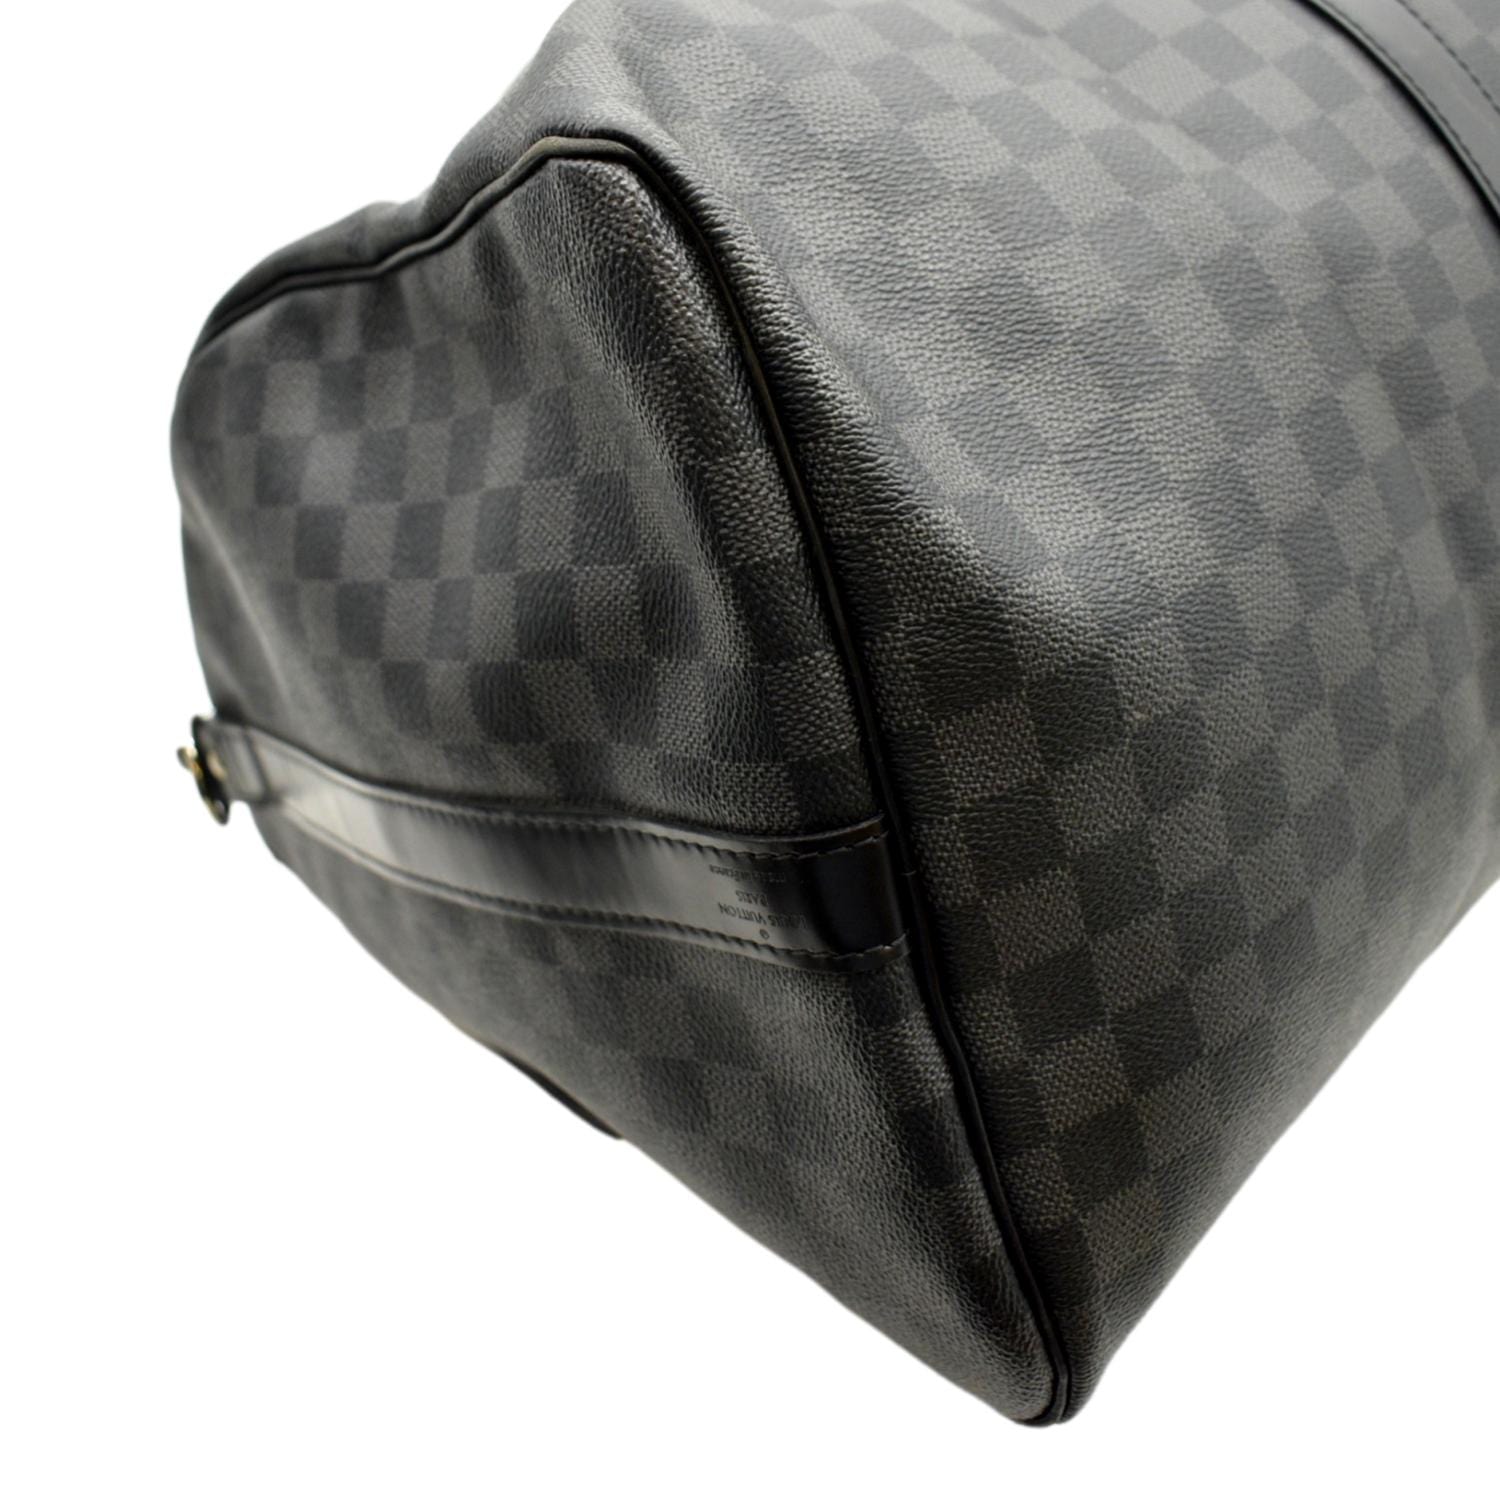 keepall bandouliere 55 damier graphite louis